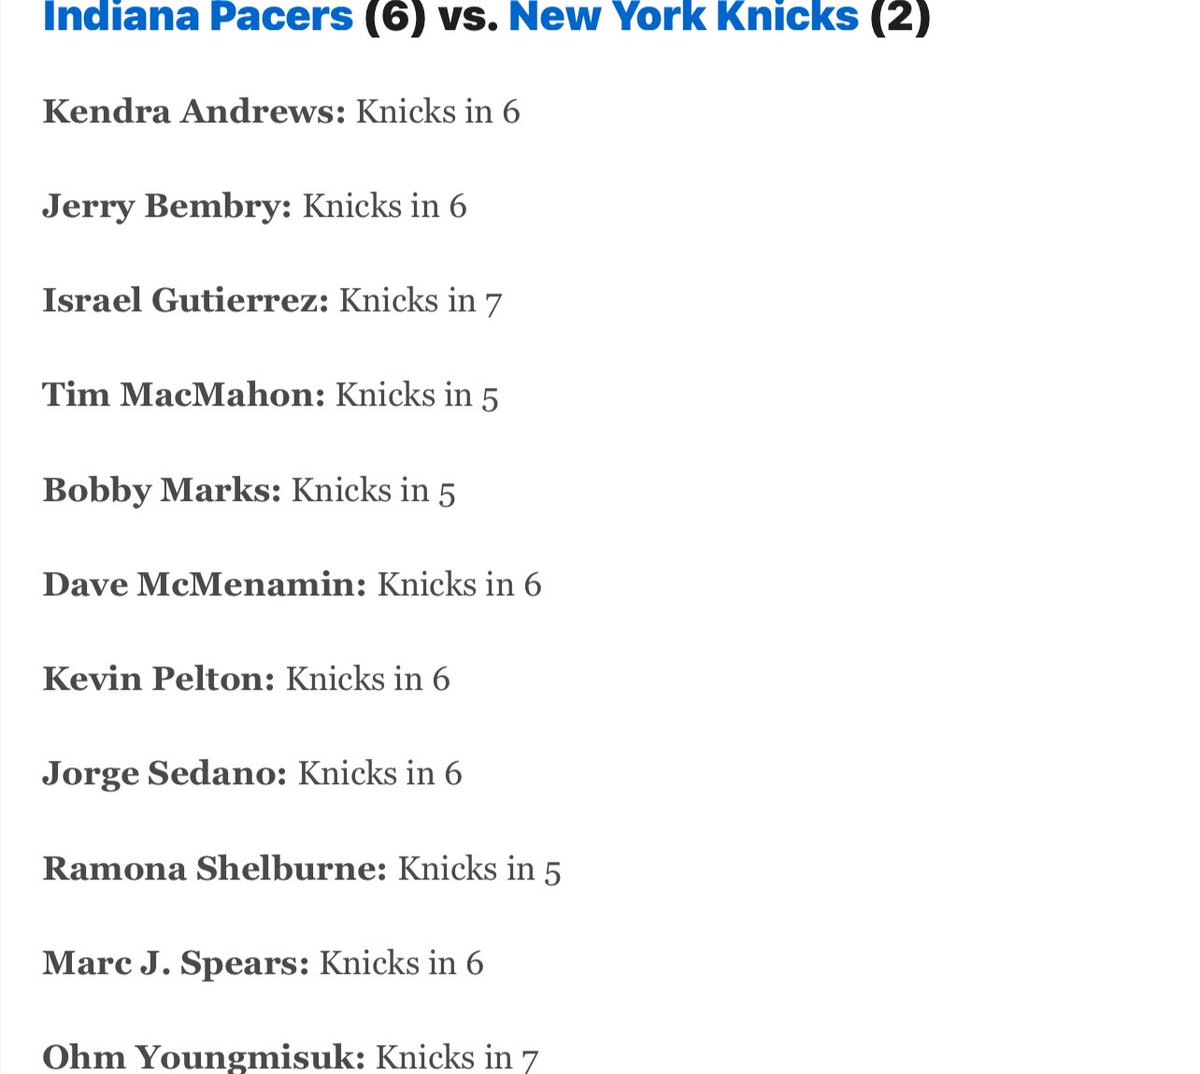 11 out of 11 ESPN reporters say Knicks over Pacers